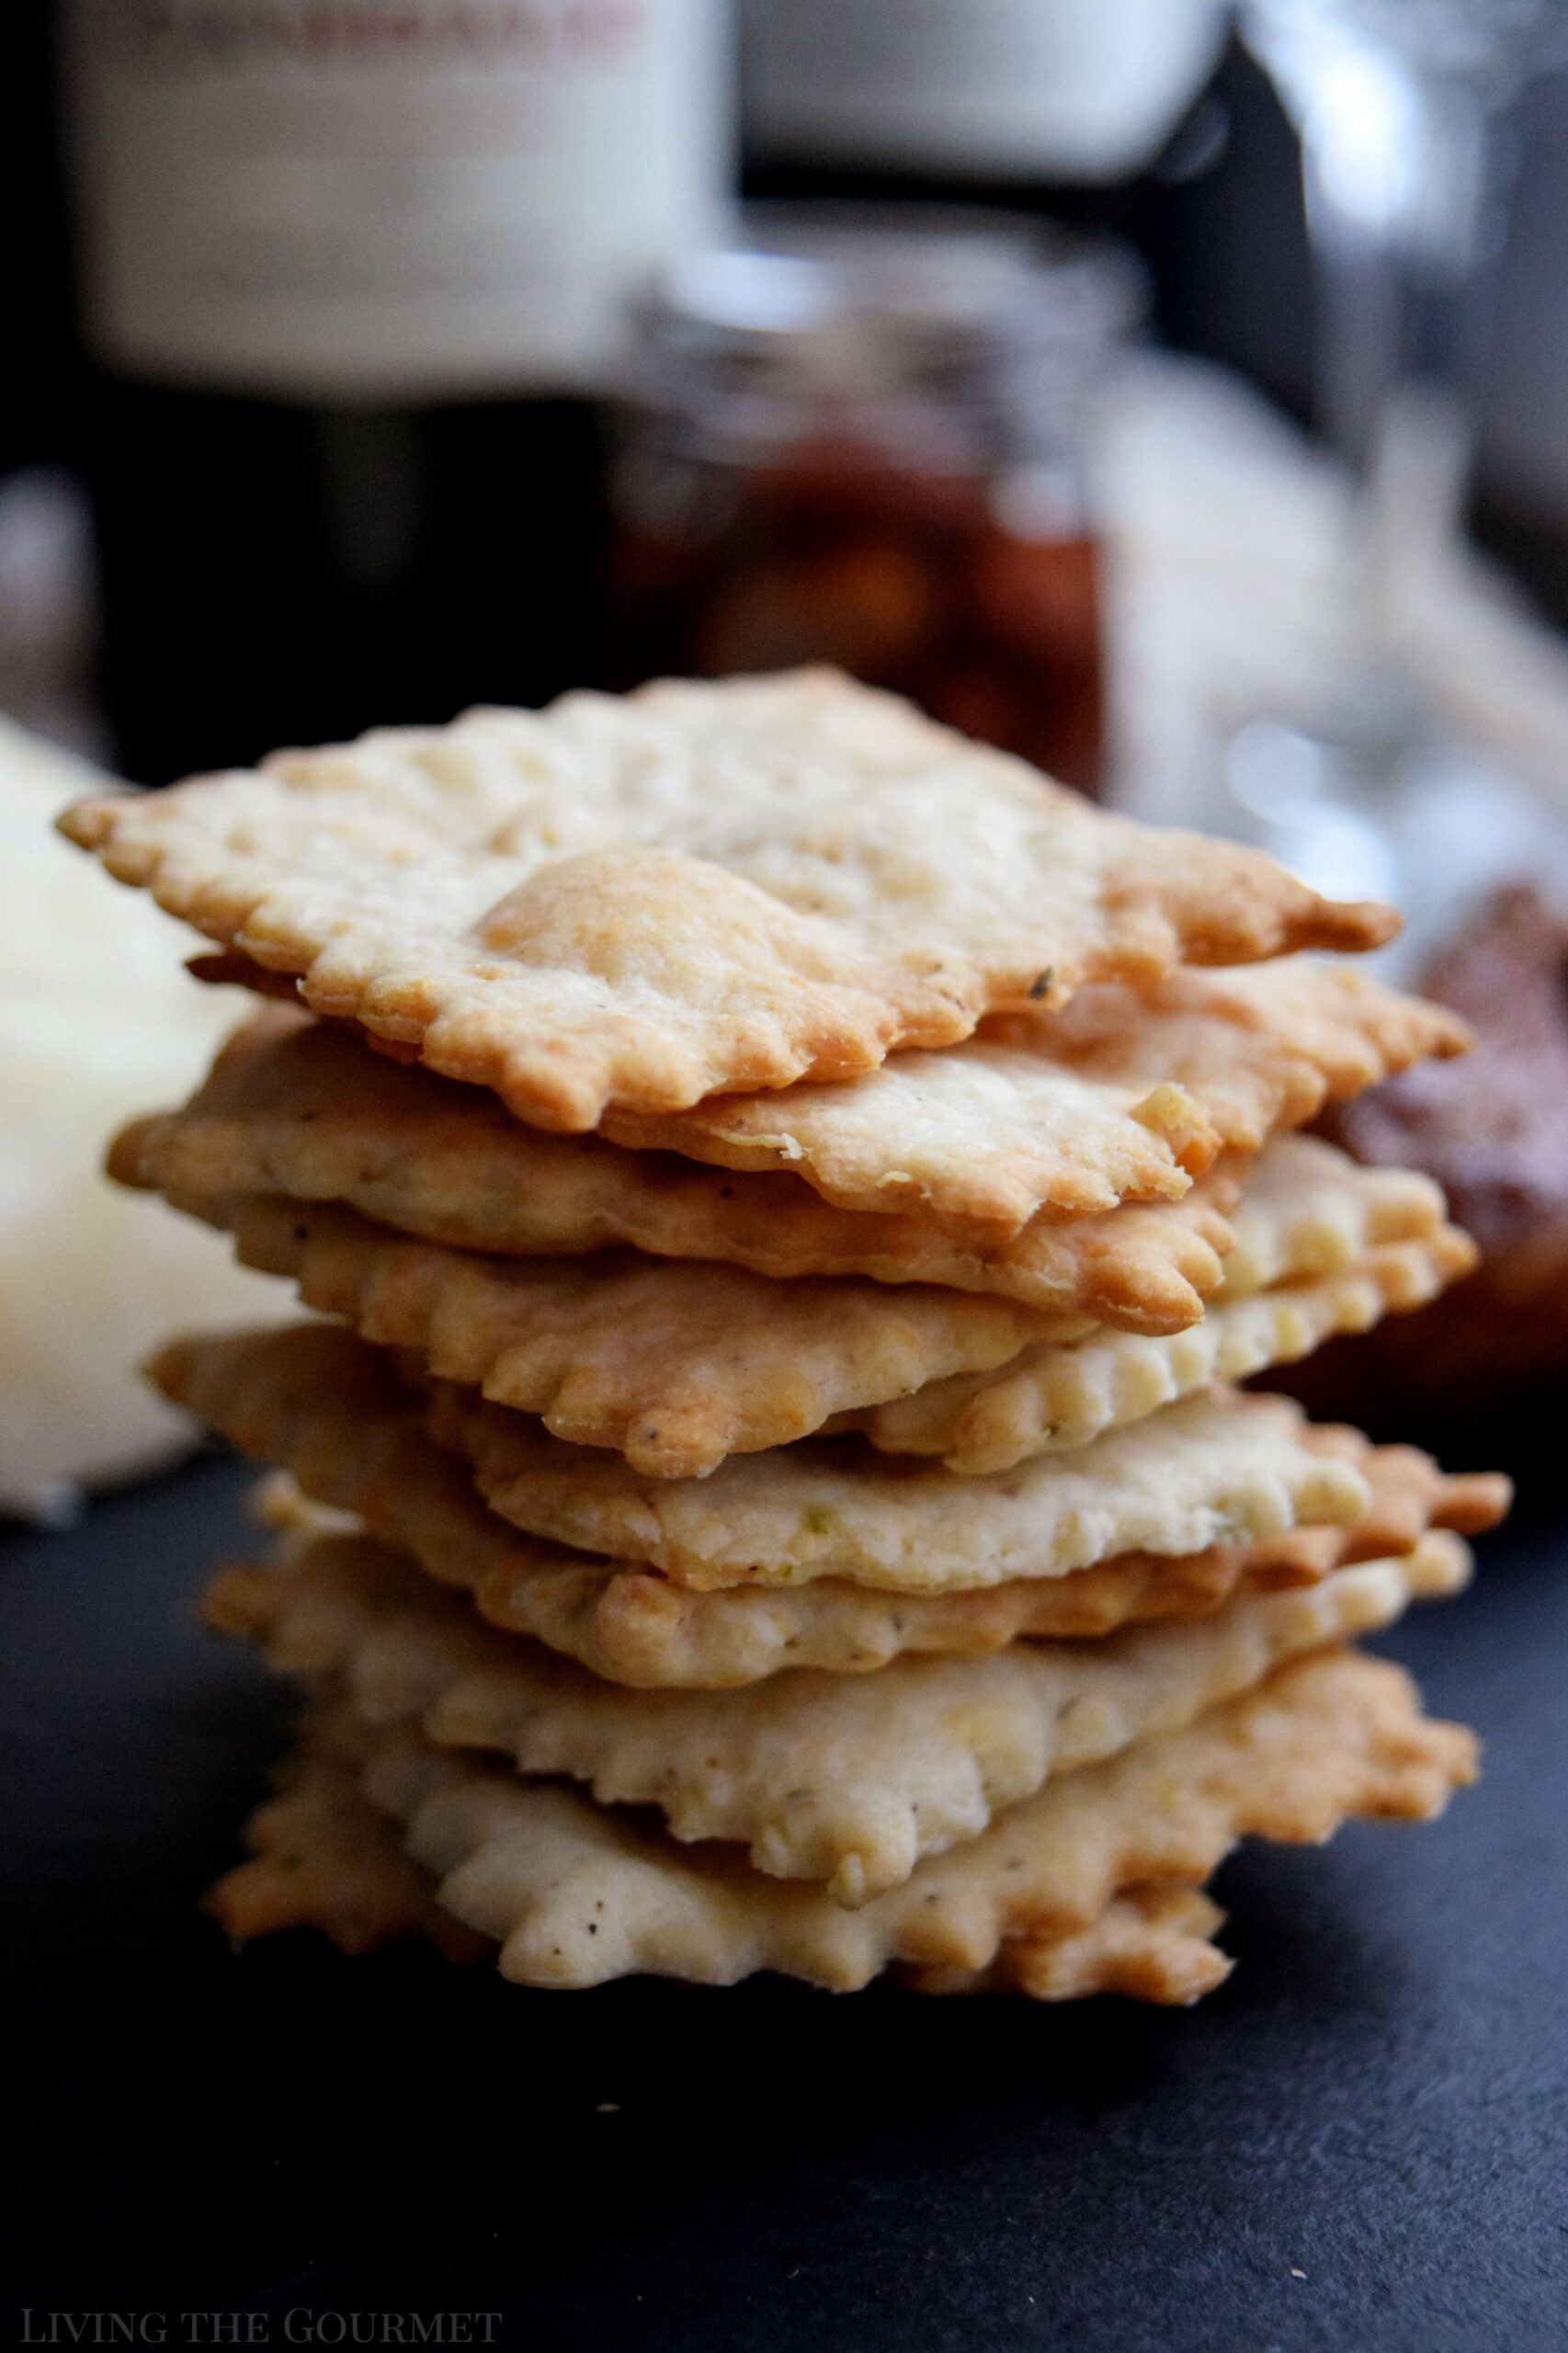  Enjoy these wine crackers on their own or pair them with your favorite cheese for a delicious snack.